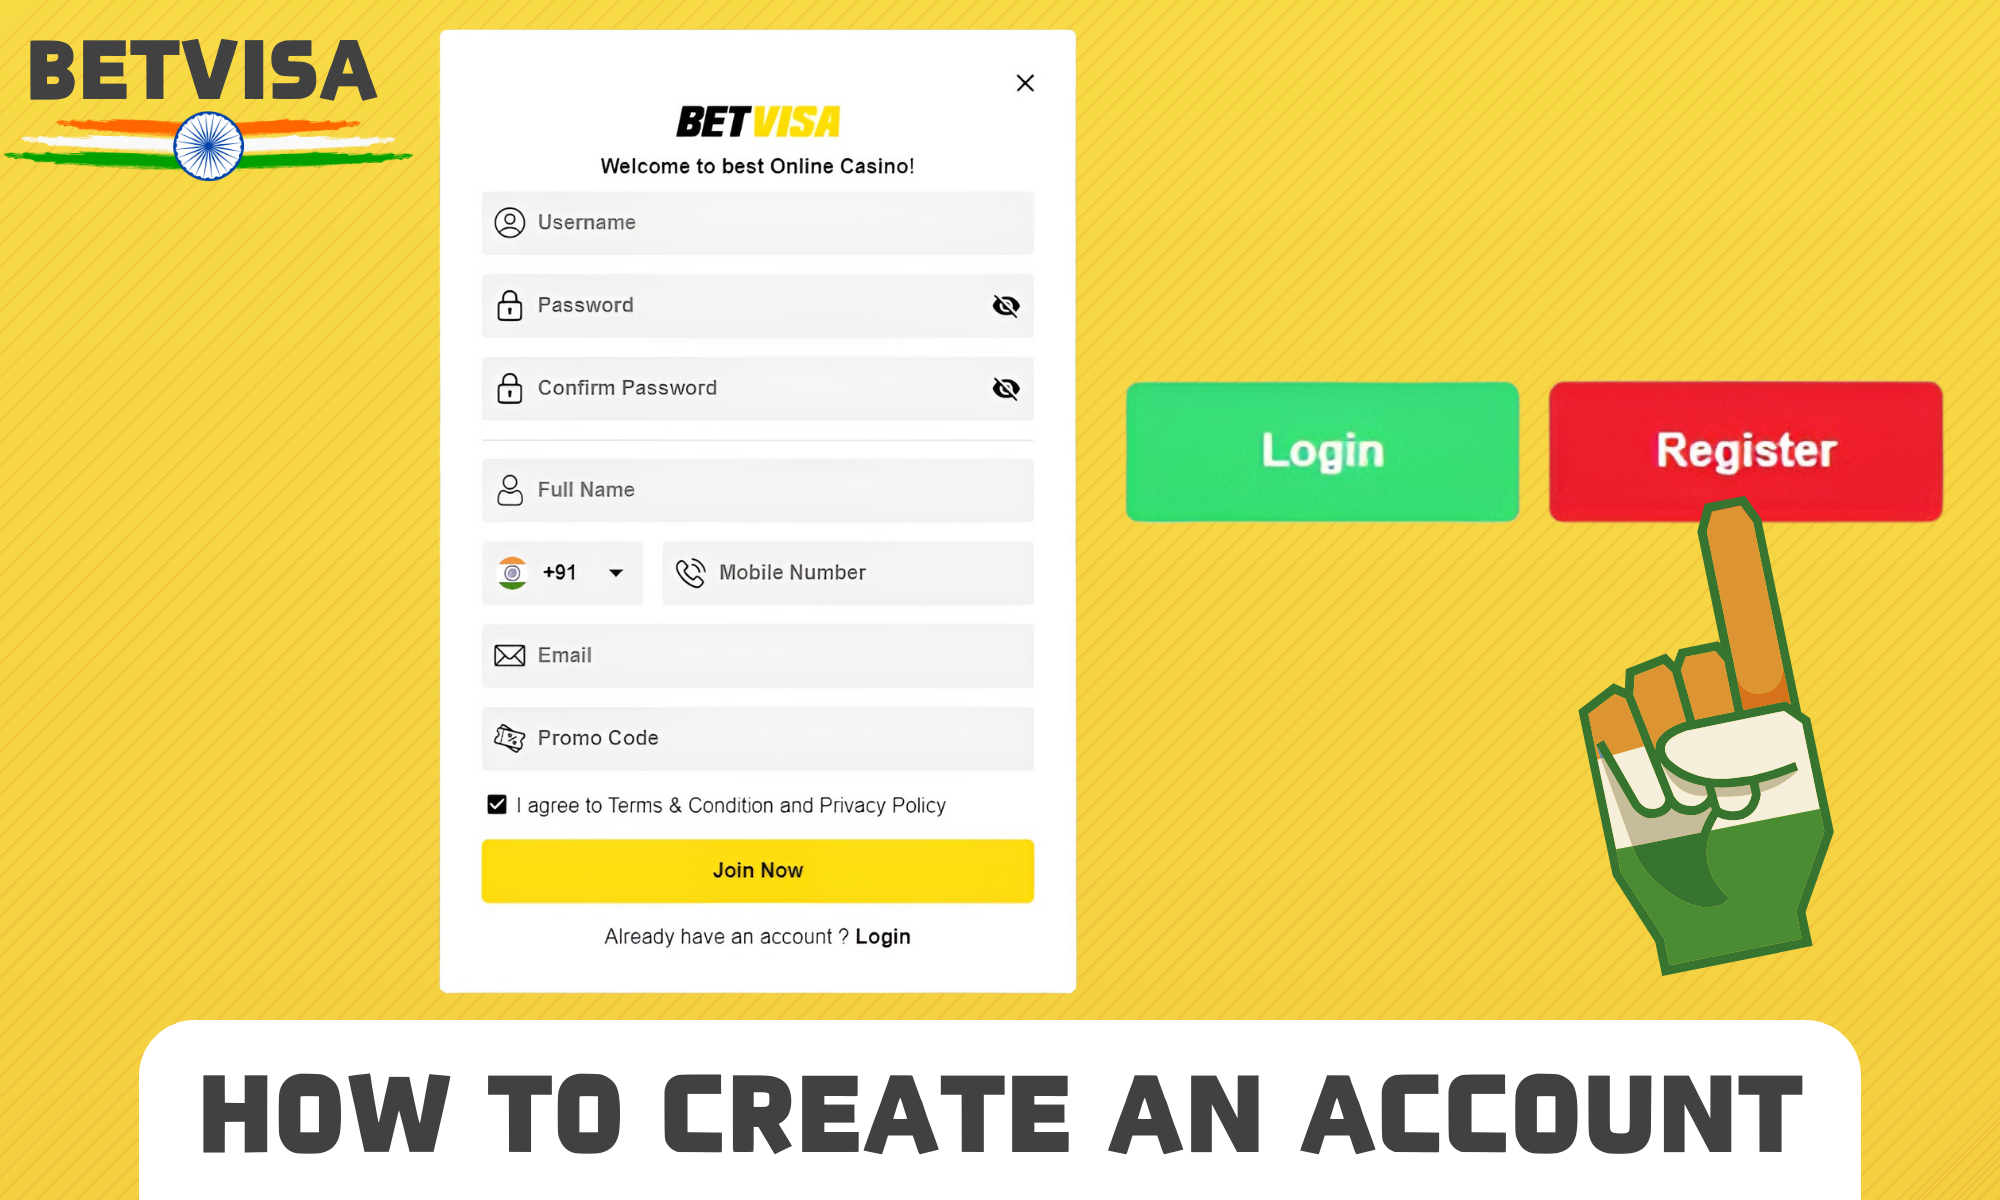 How to create an account in Betvisa